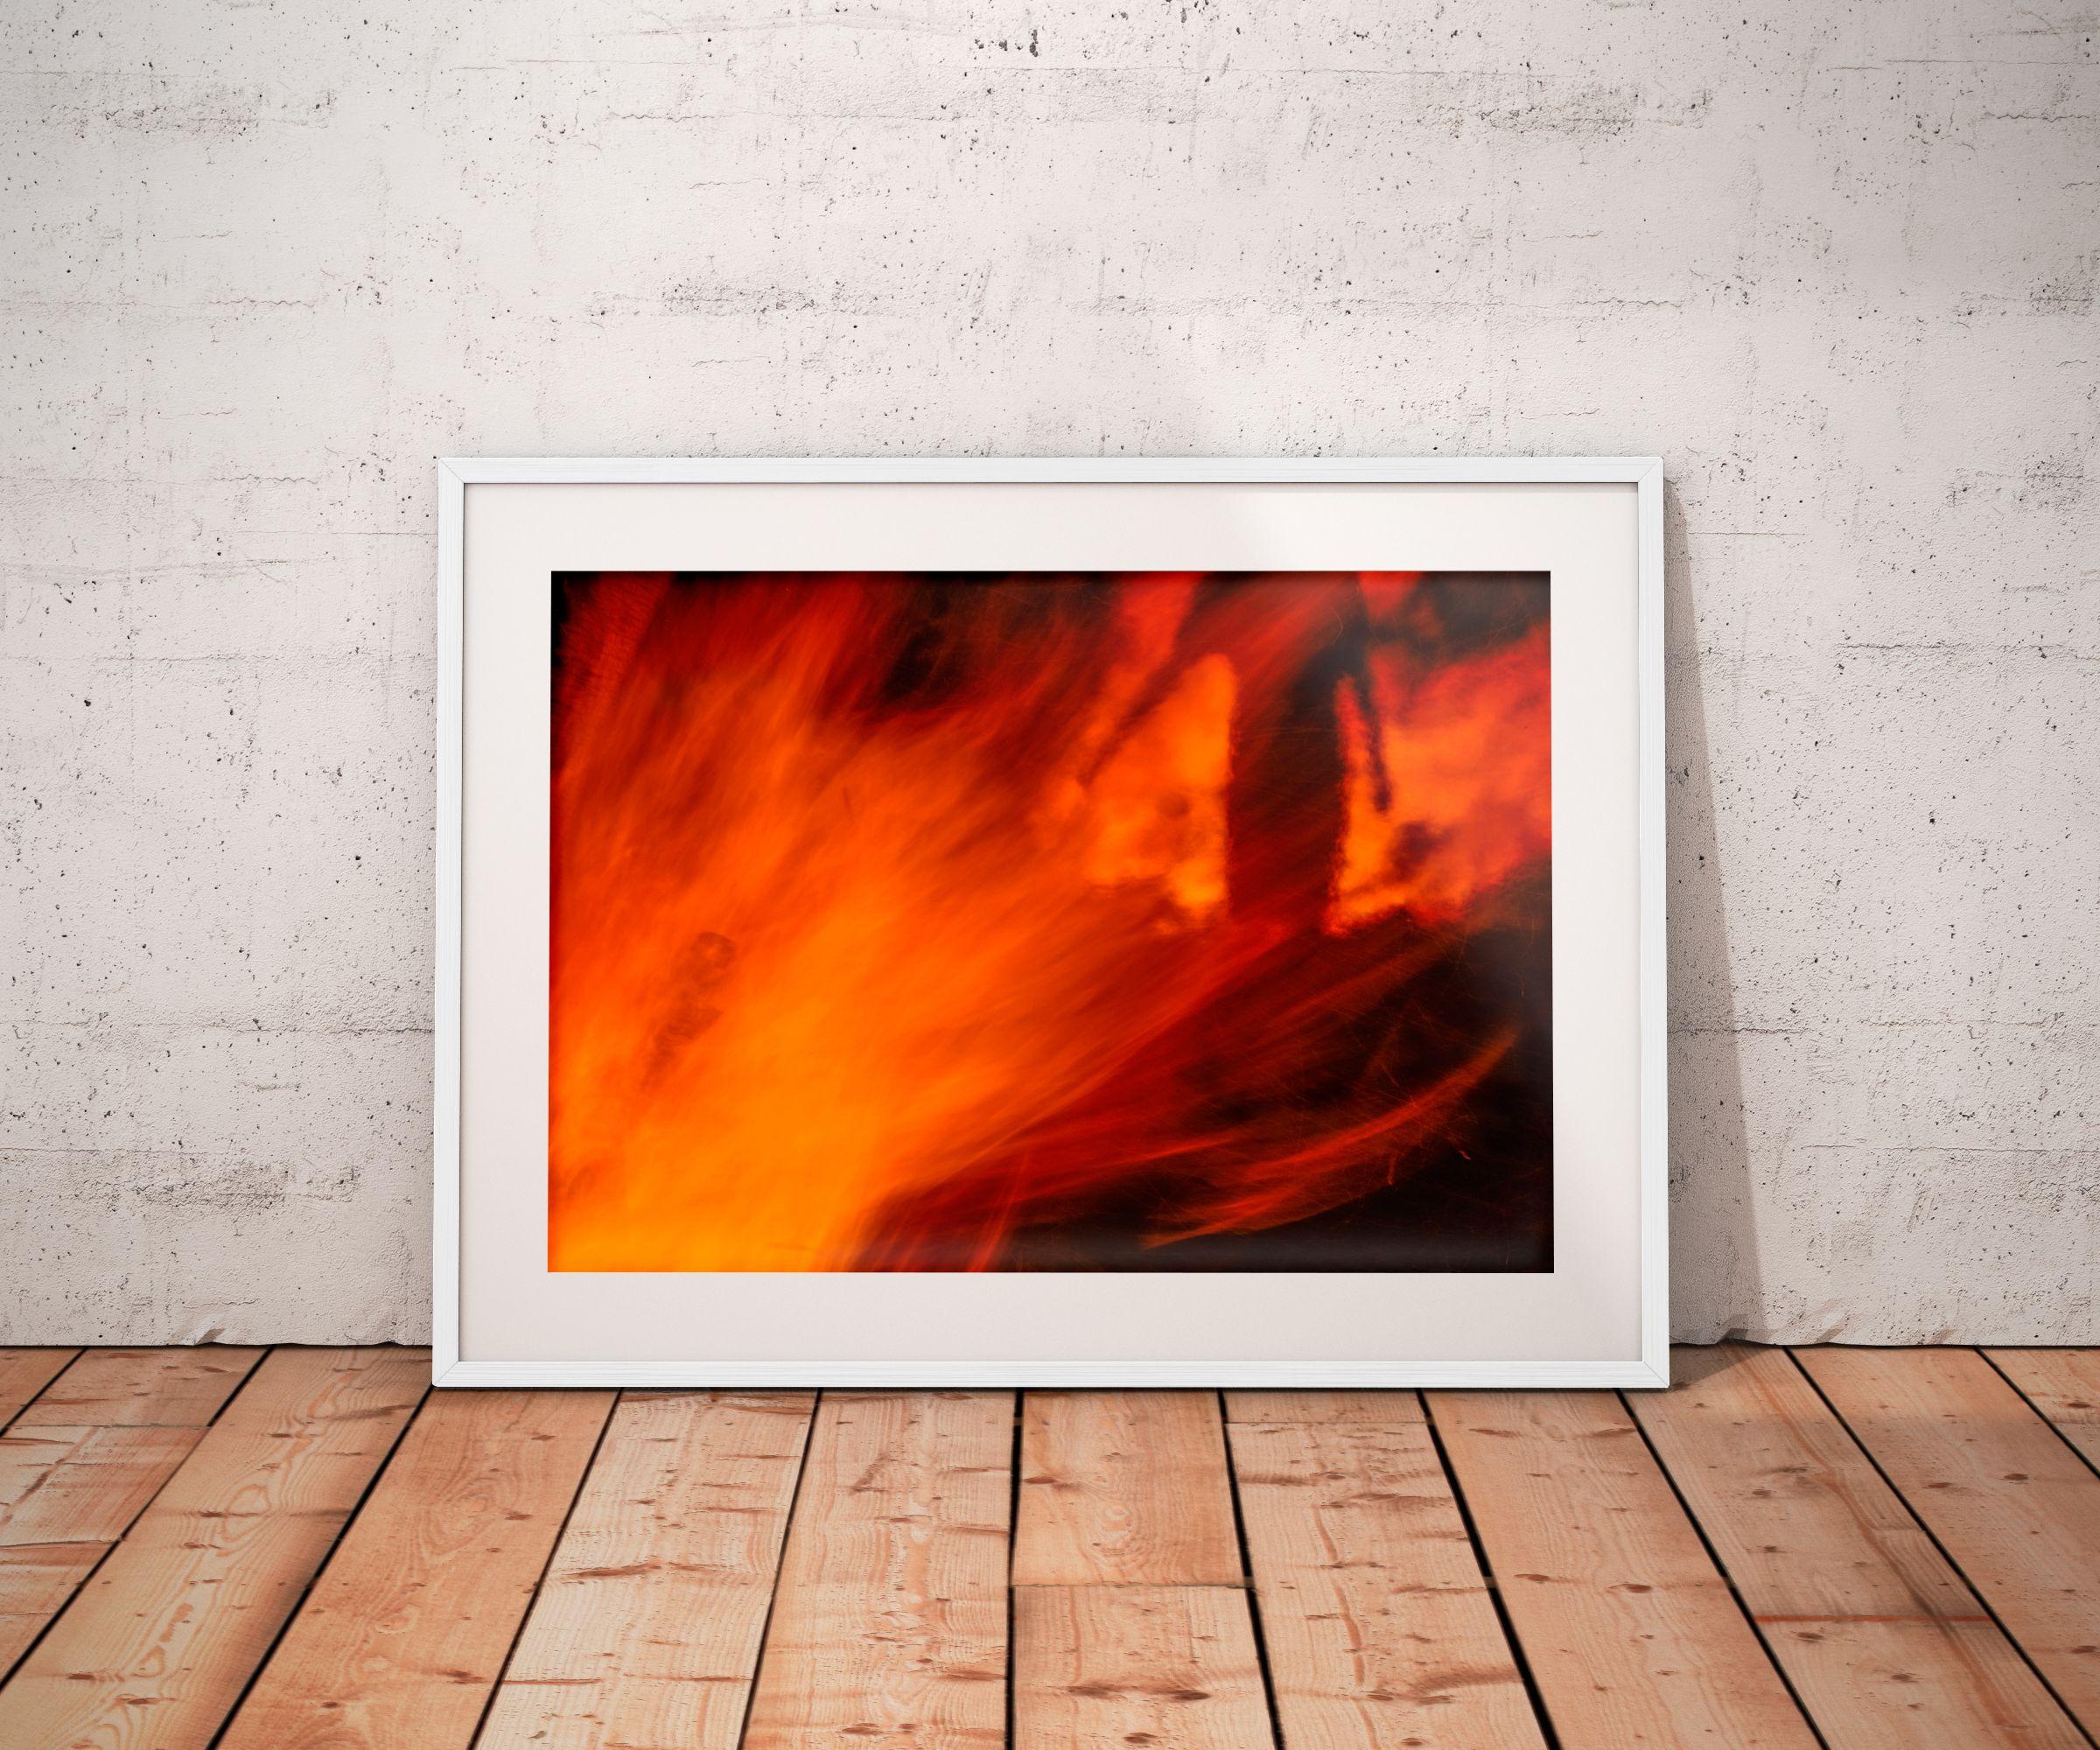 The Jewish holiday of Lag BaOmer has many customs. The most well-known custom is the lighting of bonfires throughout Israel, especially by children and families.    *****    Limited Edition Fine Art Prints, series of 10 per each size:  Each print